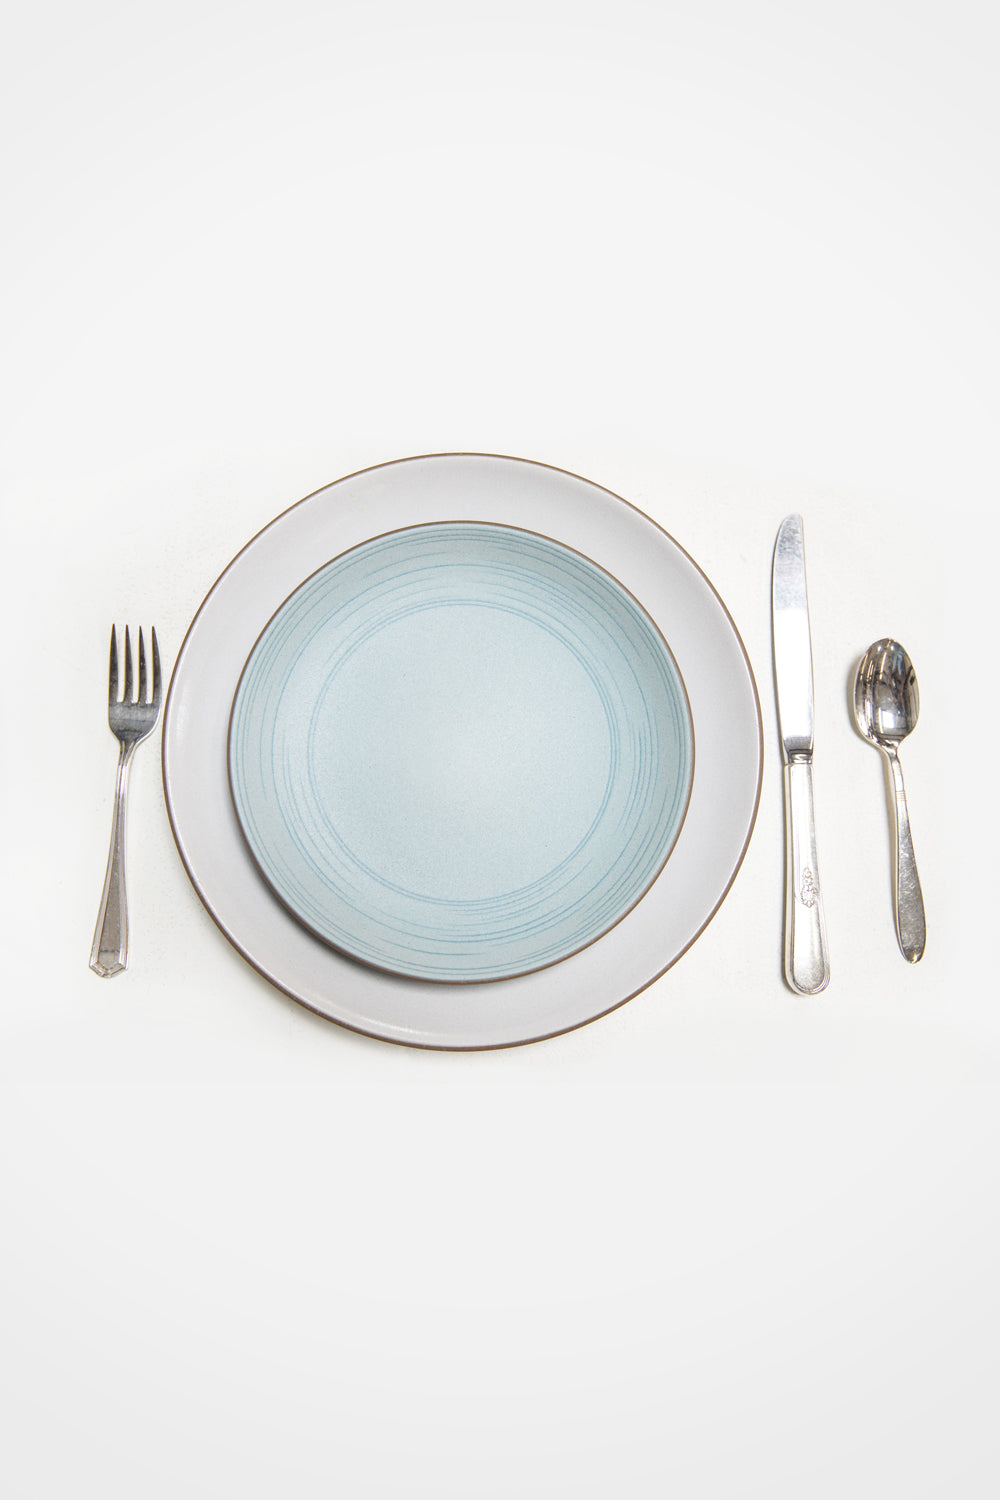 Heath Ceramics Etched Salad Place in Limited Edition Wave Blue Color. Shown on top of Opaque White Dinner Plate.